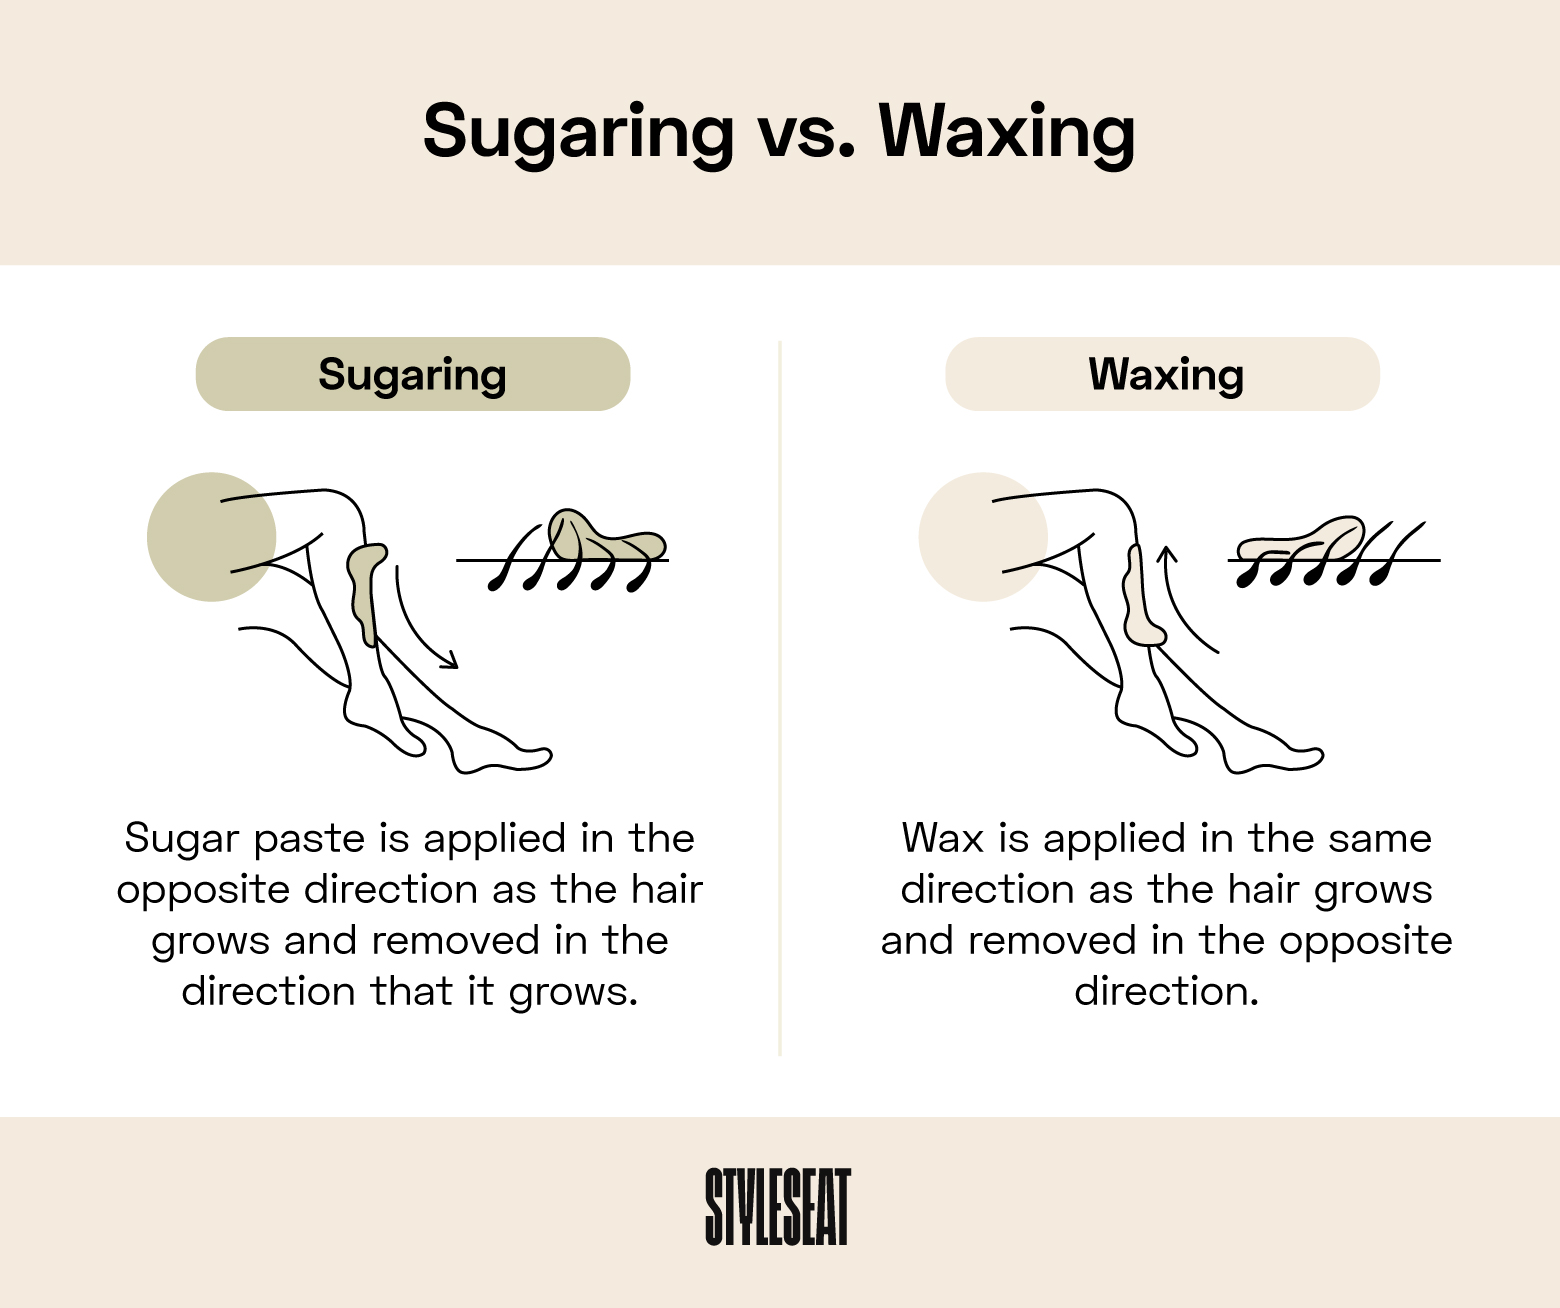 The difference between sugaring and waxing